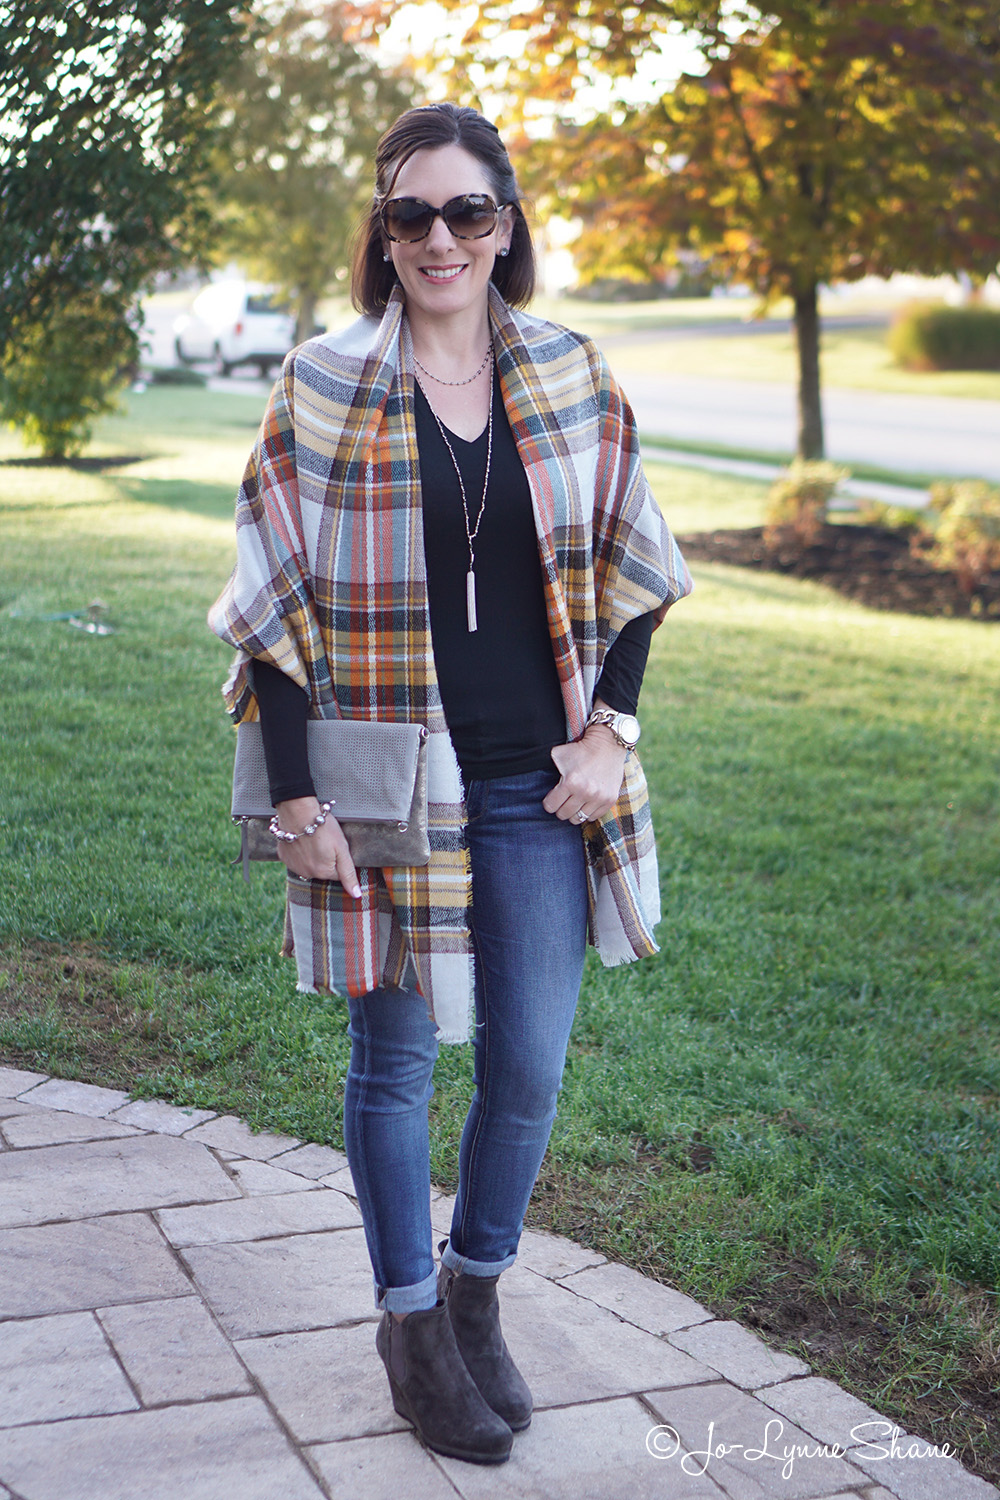 3 Easy Ways to Tie a Blanket Scarf